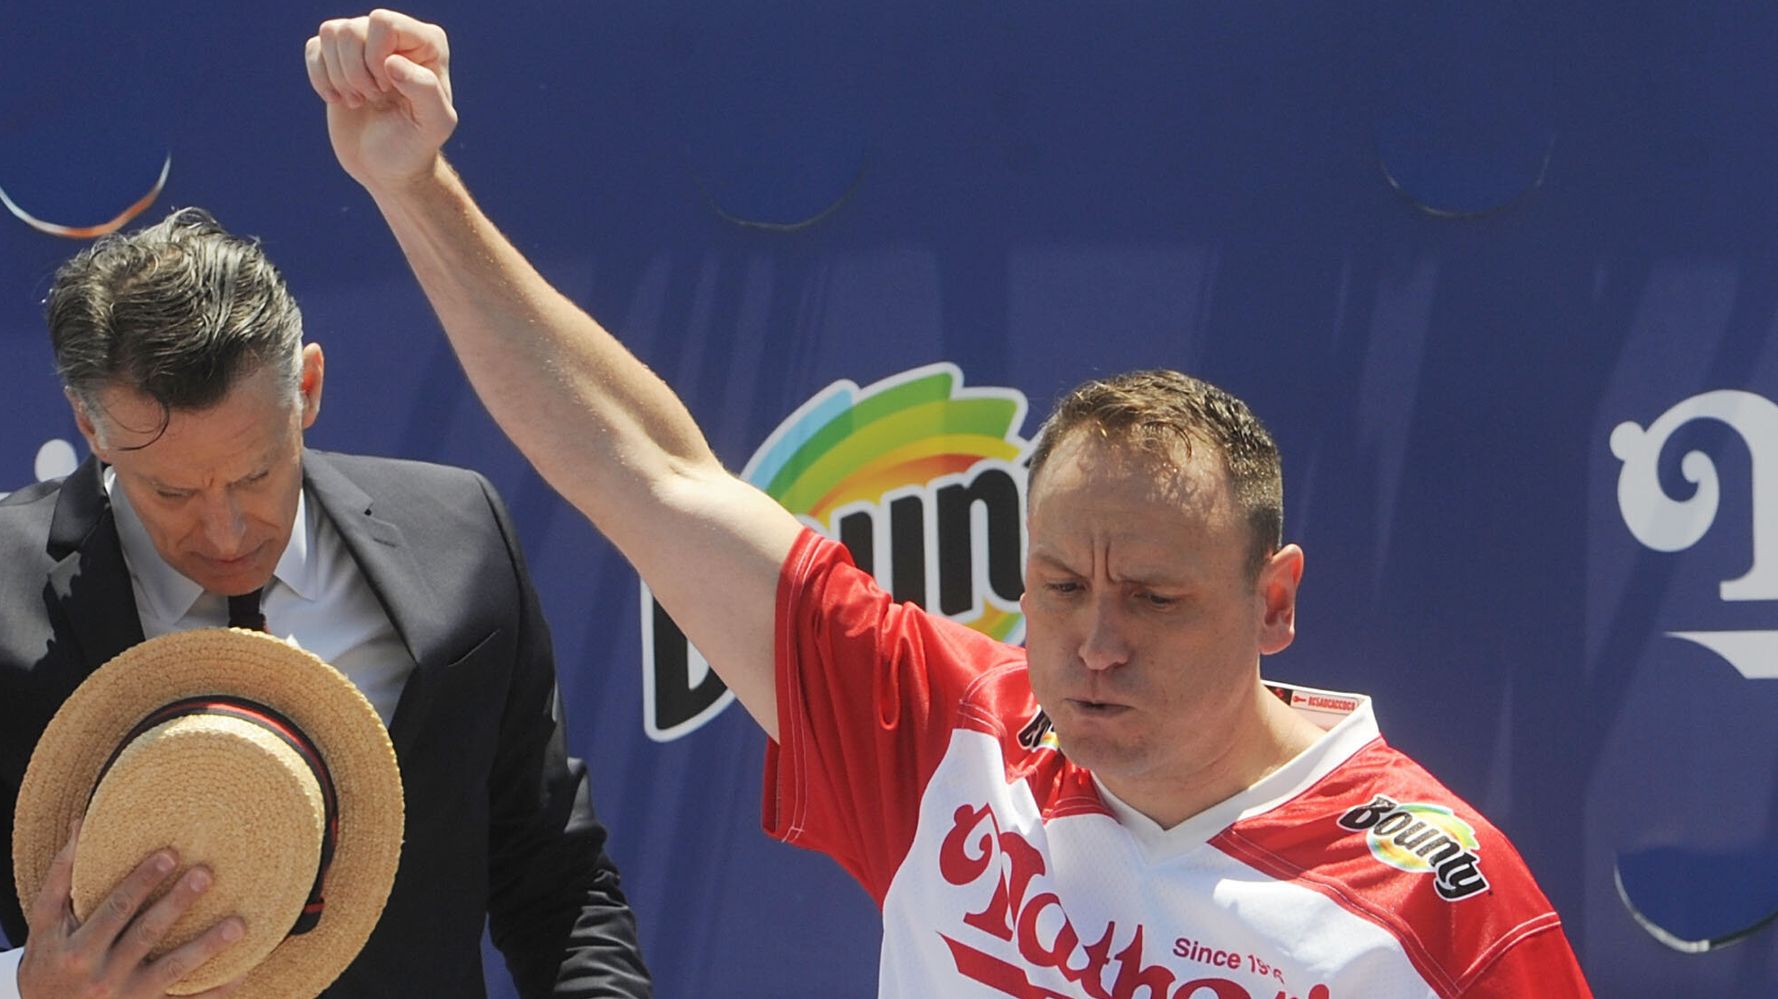 Joey Chestnut Just Ate An Absurd Number Of Hot Dogs In Record-Breaking Performance